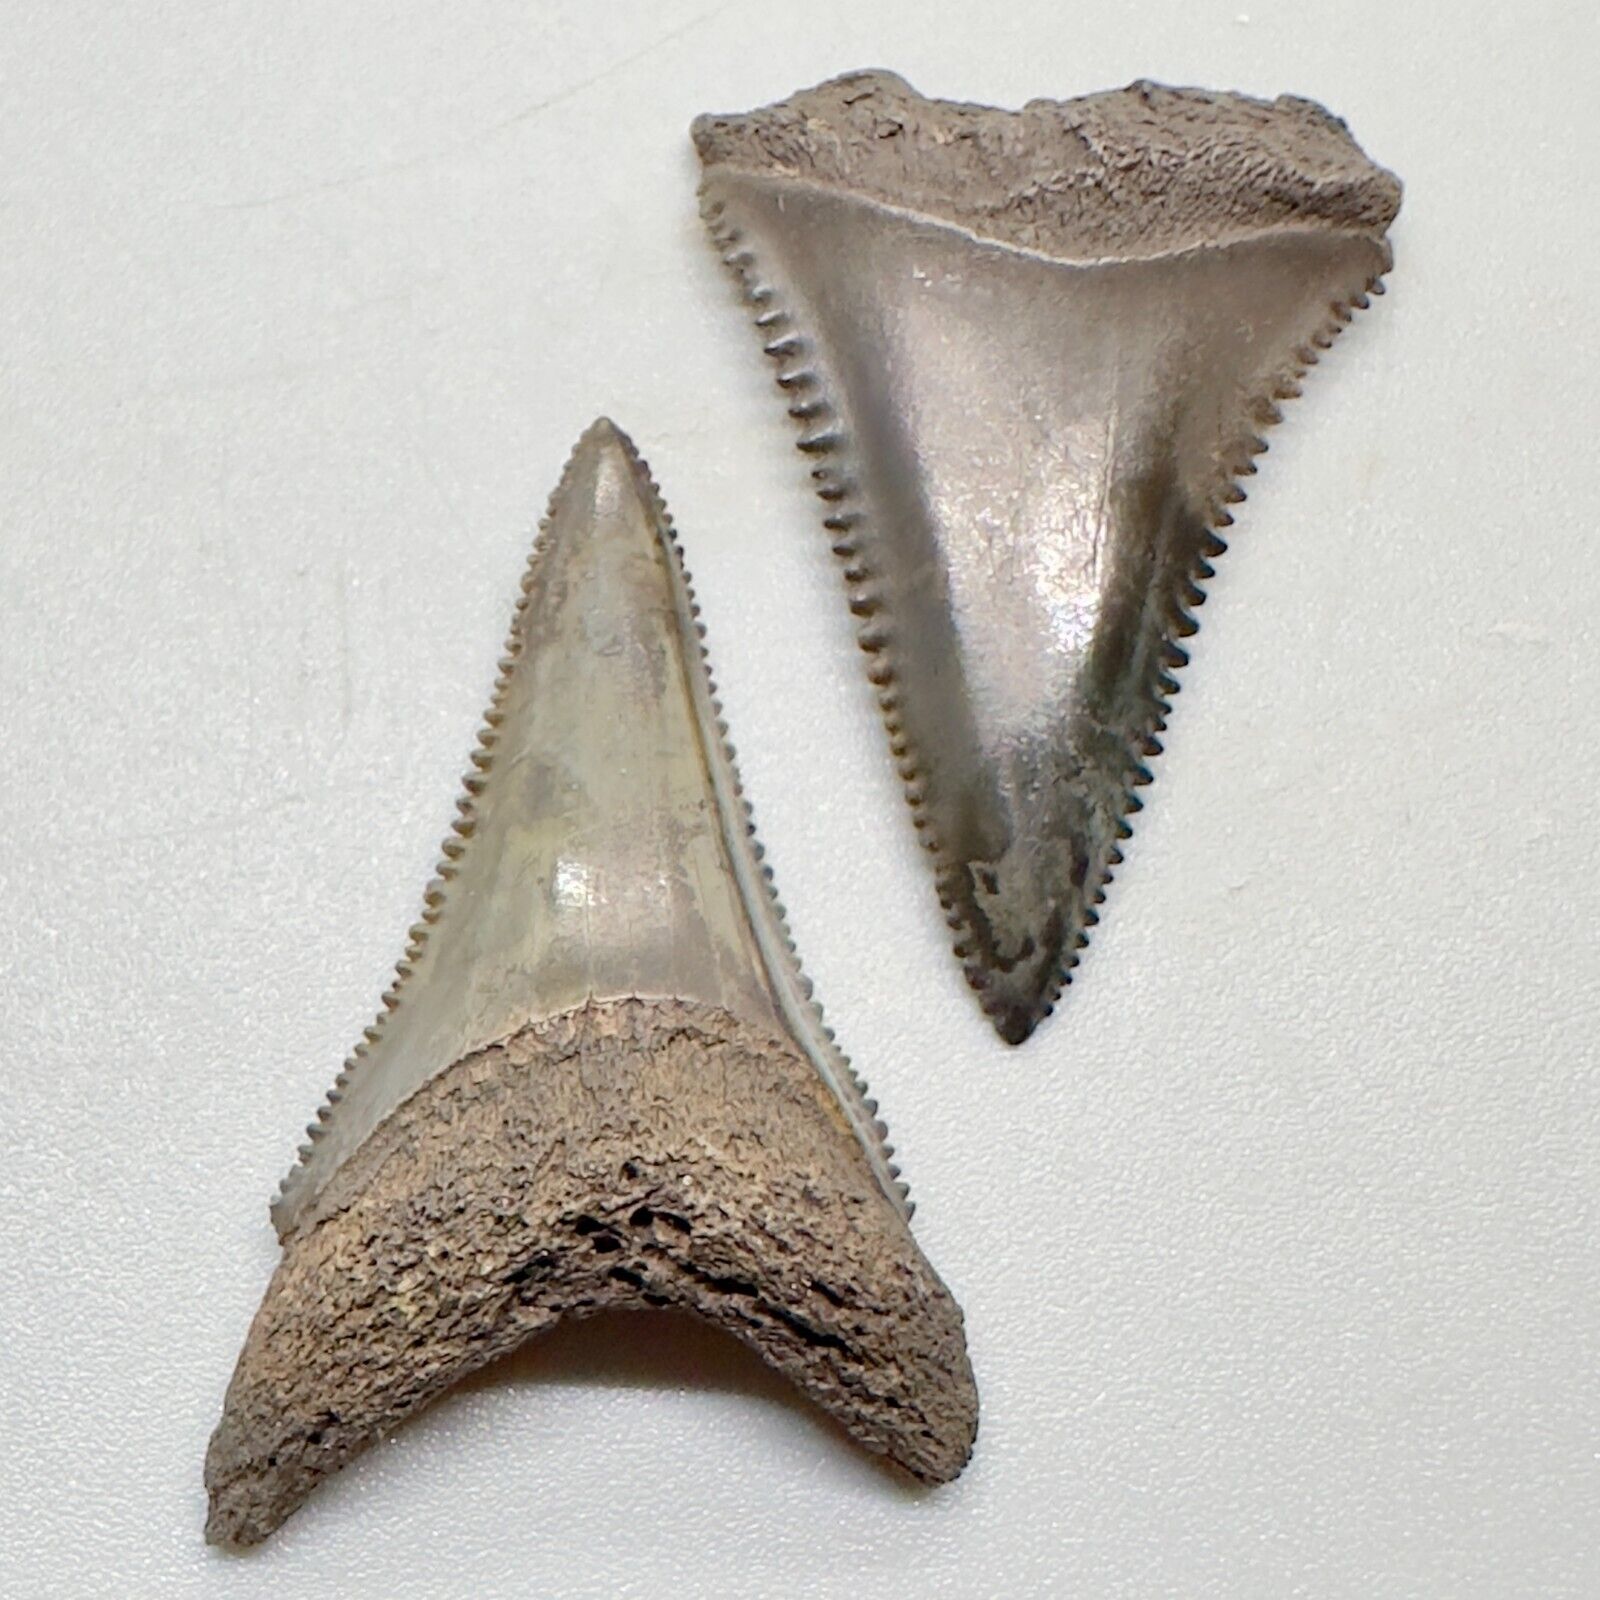 Pair of colorful U/L Fossil GREAT WHITE Shark Teeth - Waccasassa River, FL